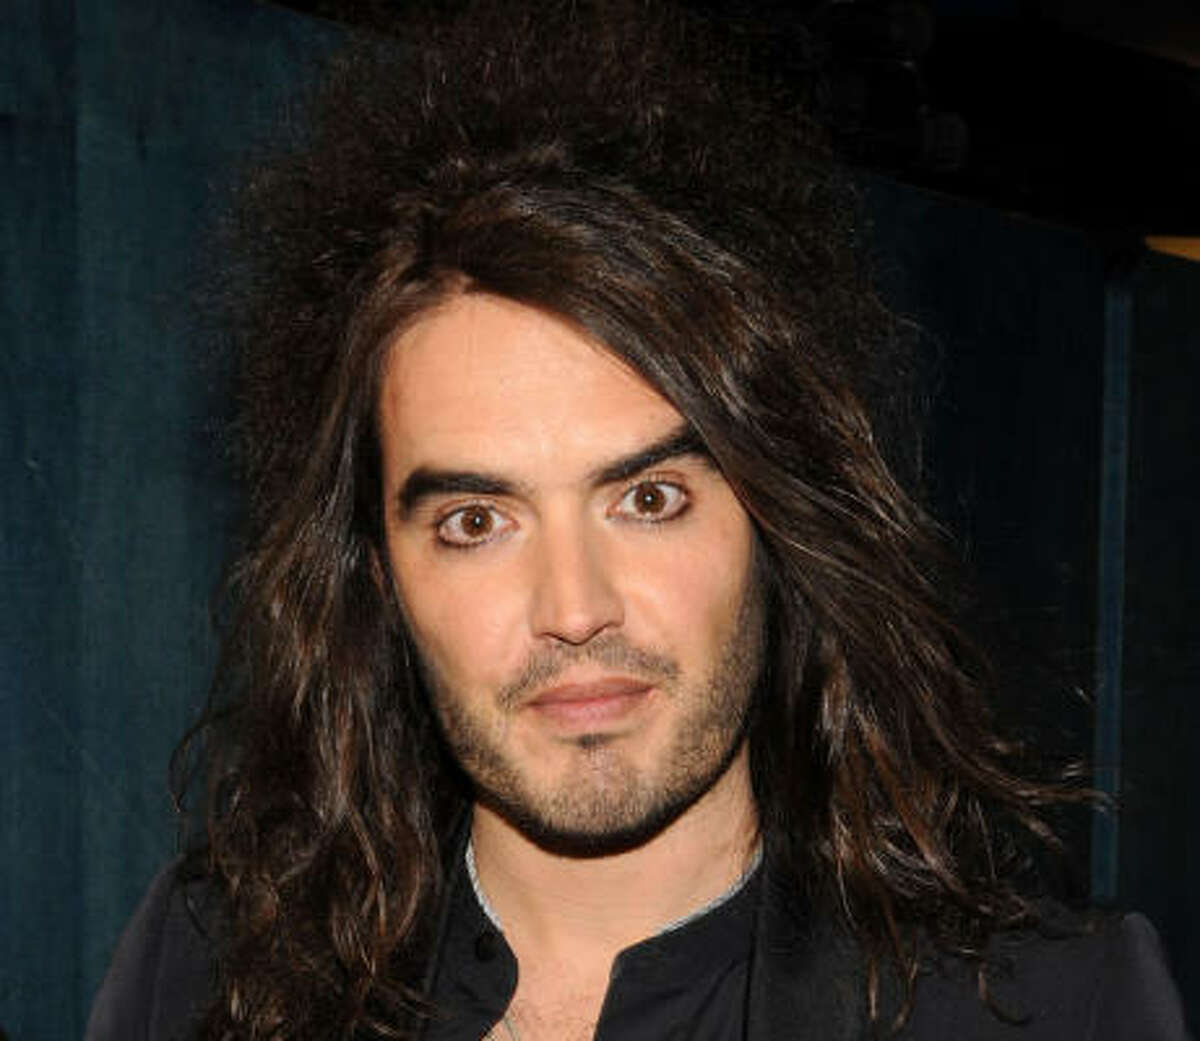 British comedian Russell Brand once bragged to GQ that he’s slept with more than 80 women a month. He has the bed head to back that statement up.